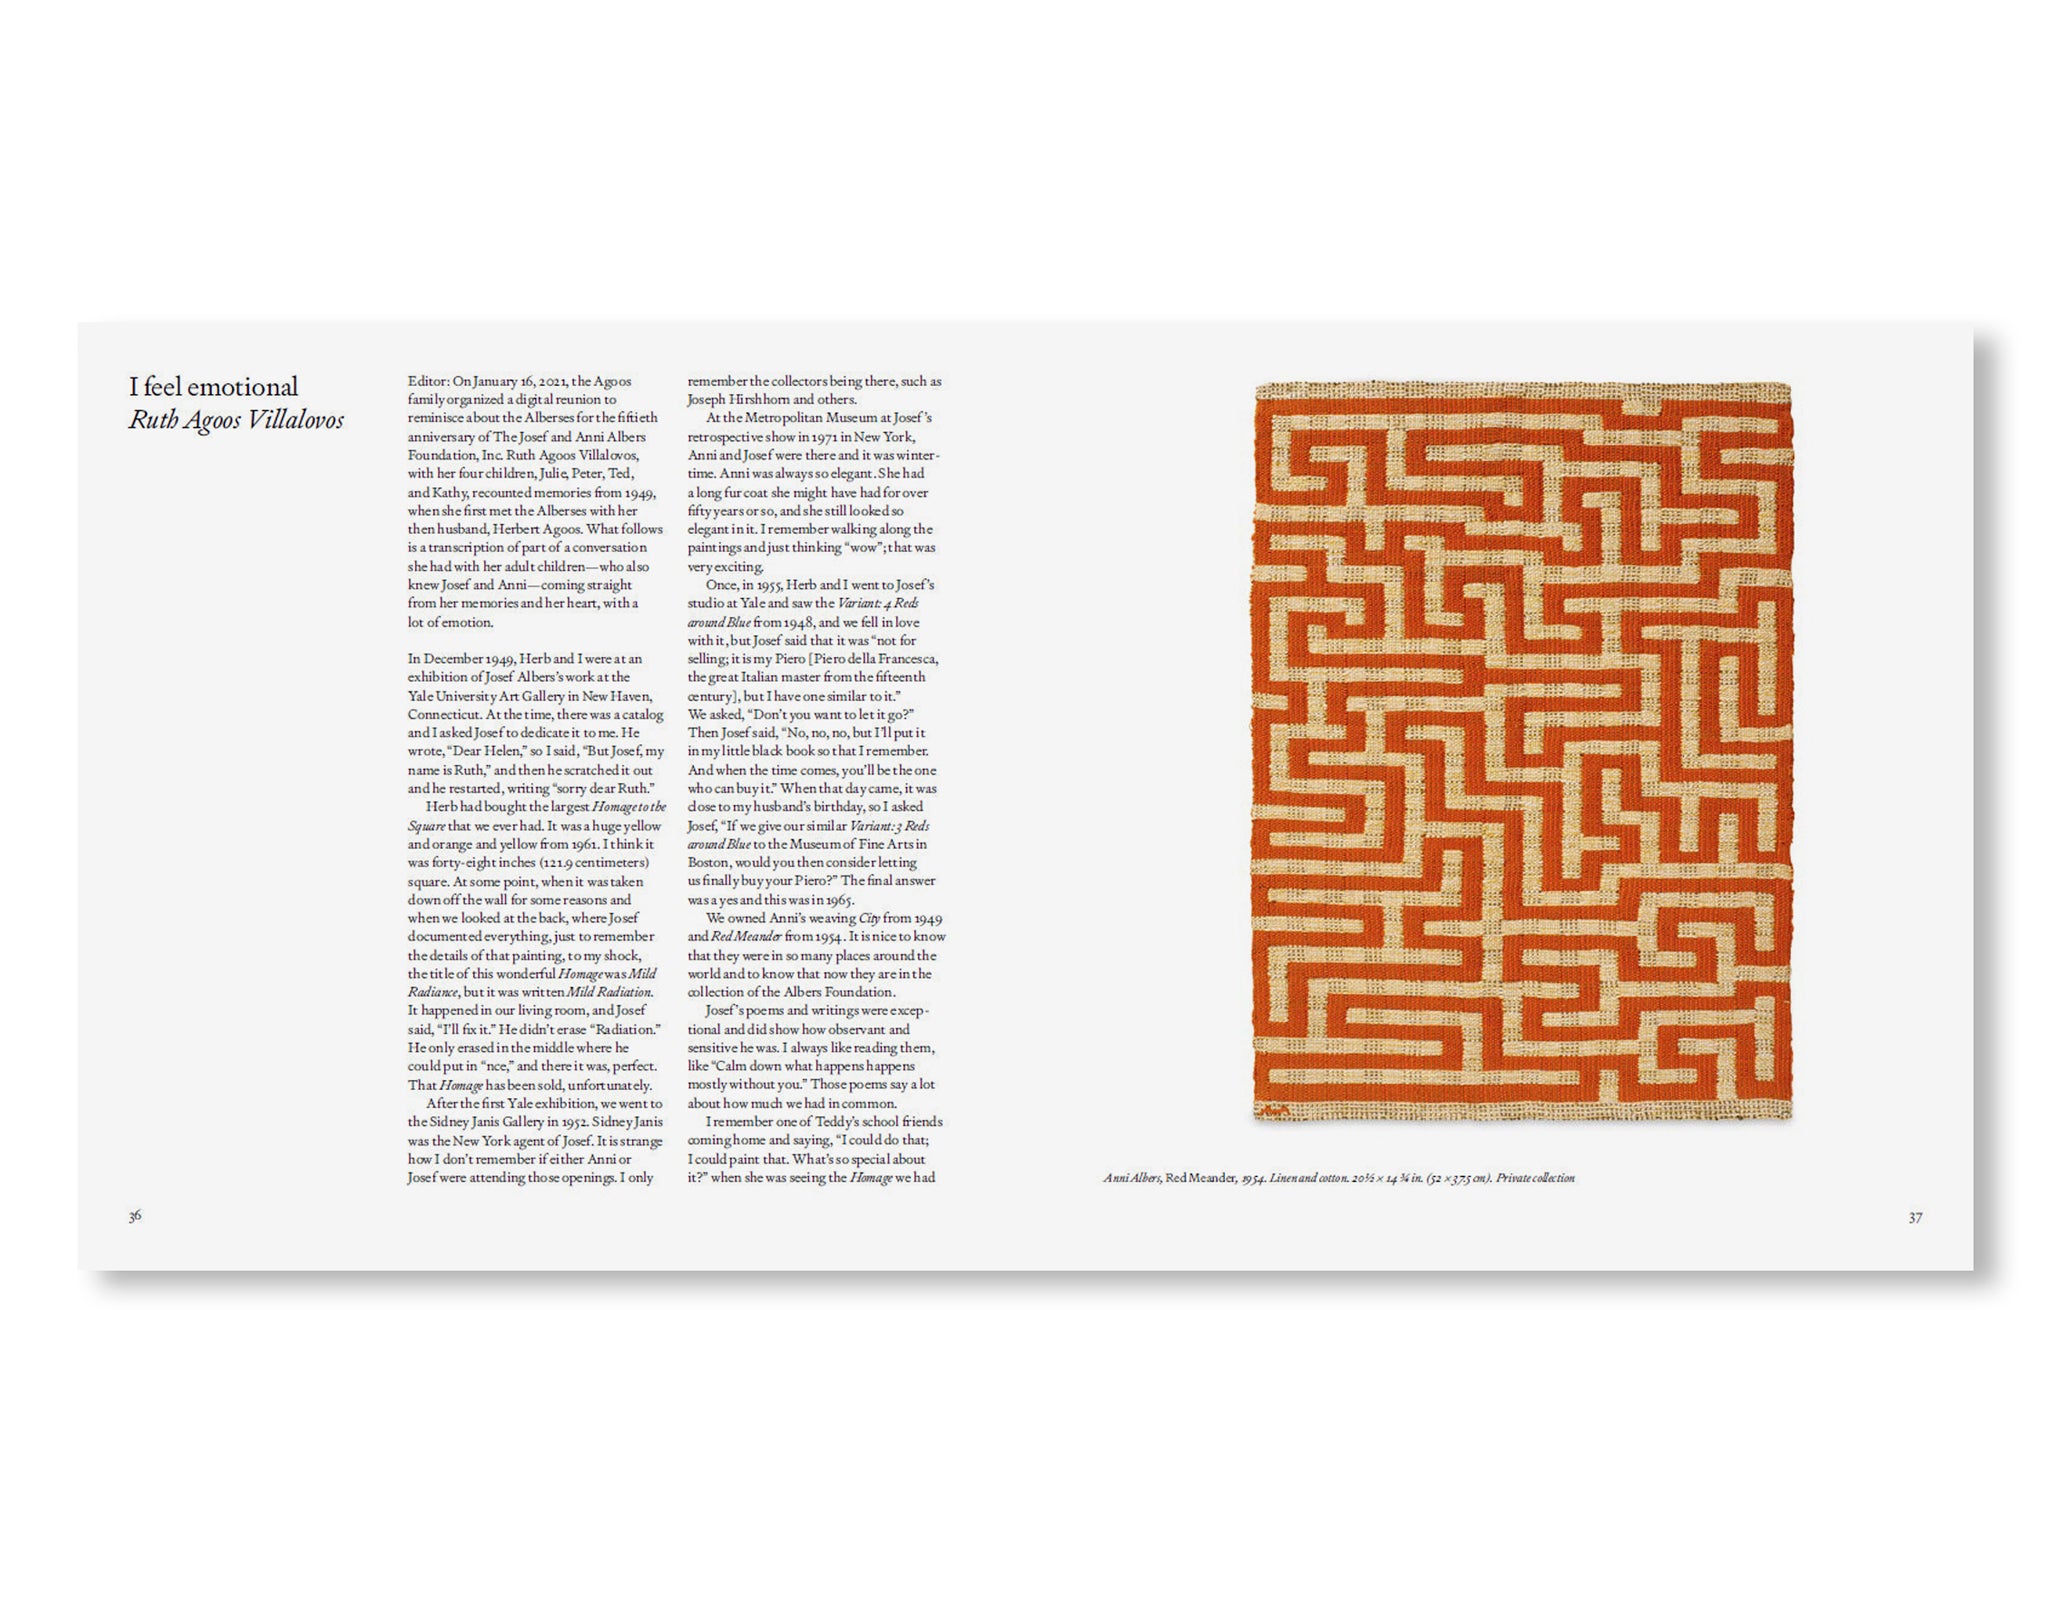 YOU CAN GO ANYWHERE – THE JOSEF AND ANNI ALBERS FOUNDATION AT 50